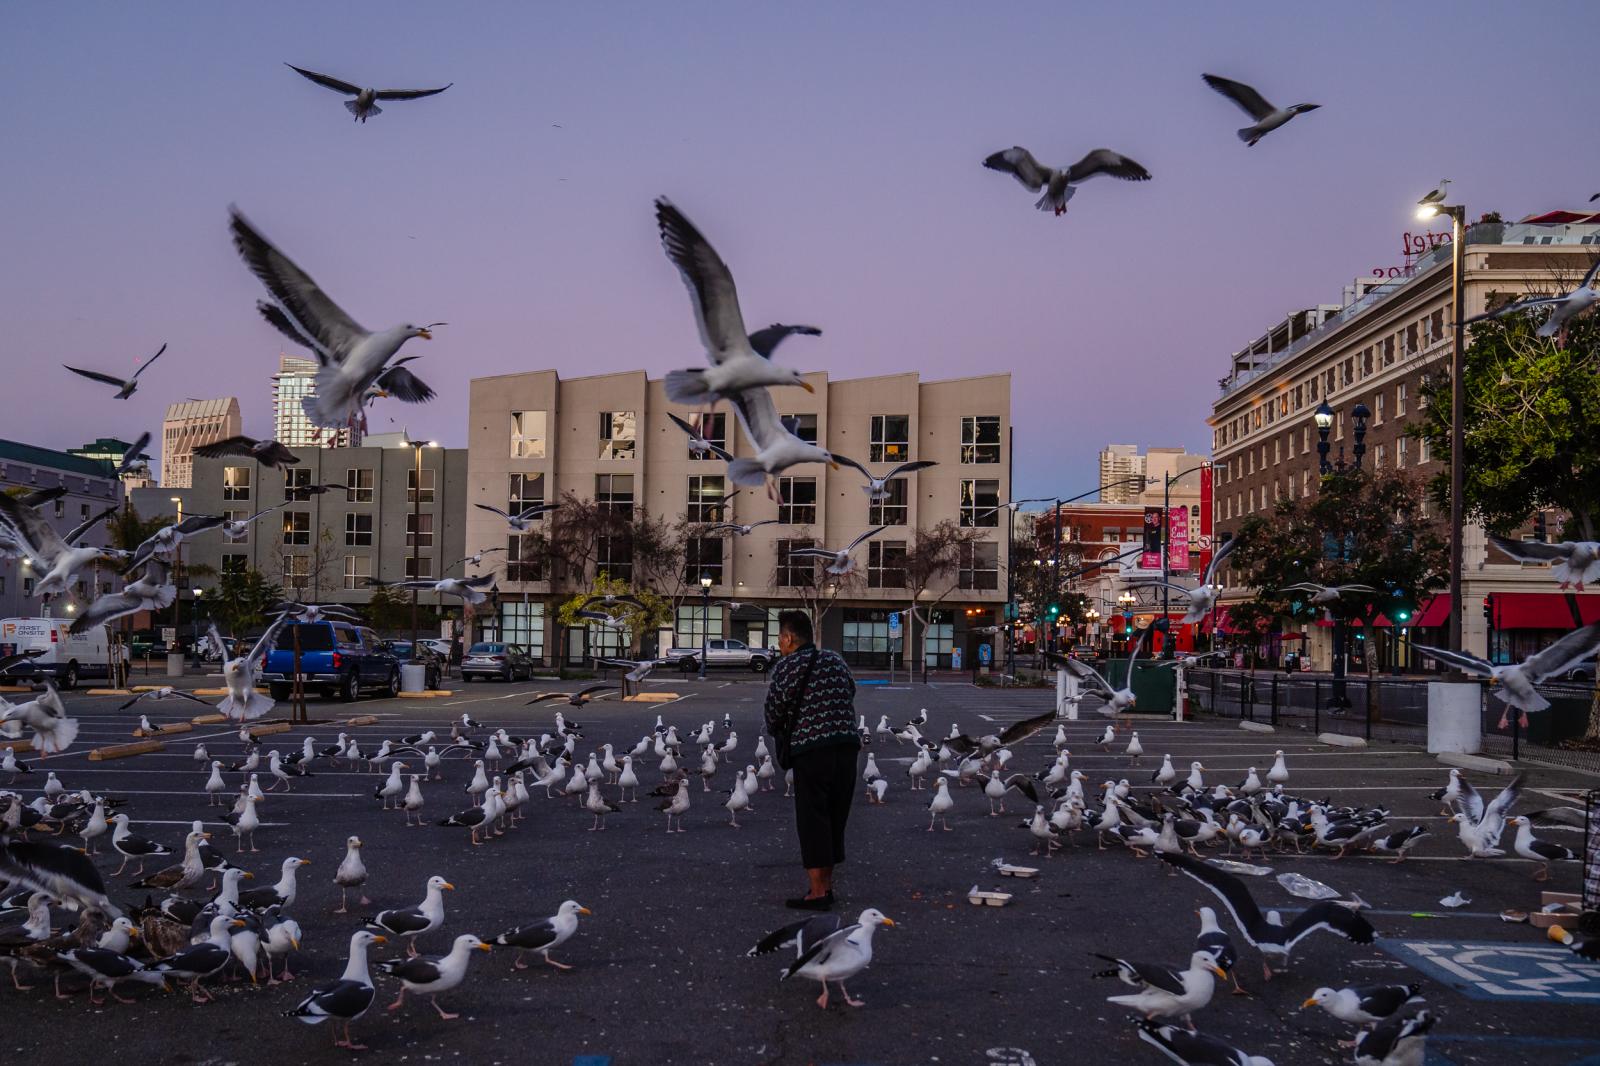 Image from United States - A woman feeds birds early morning in a downtown parking...